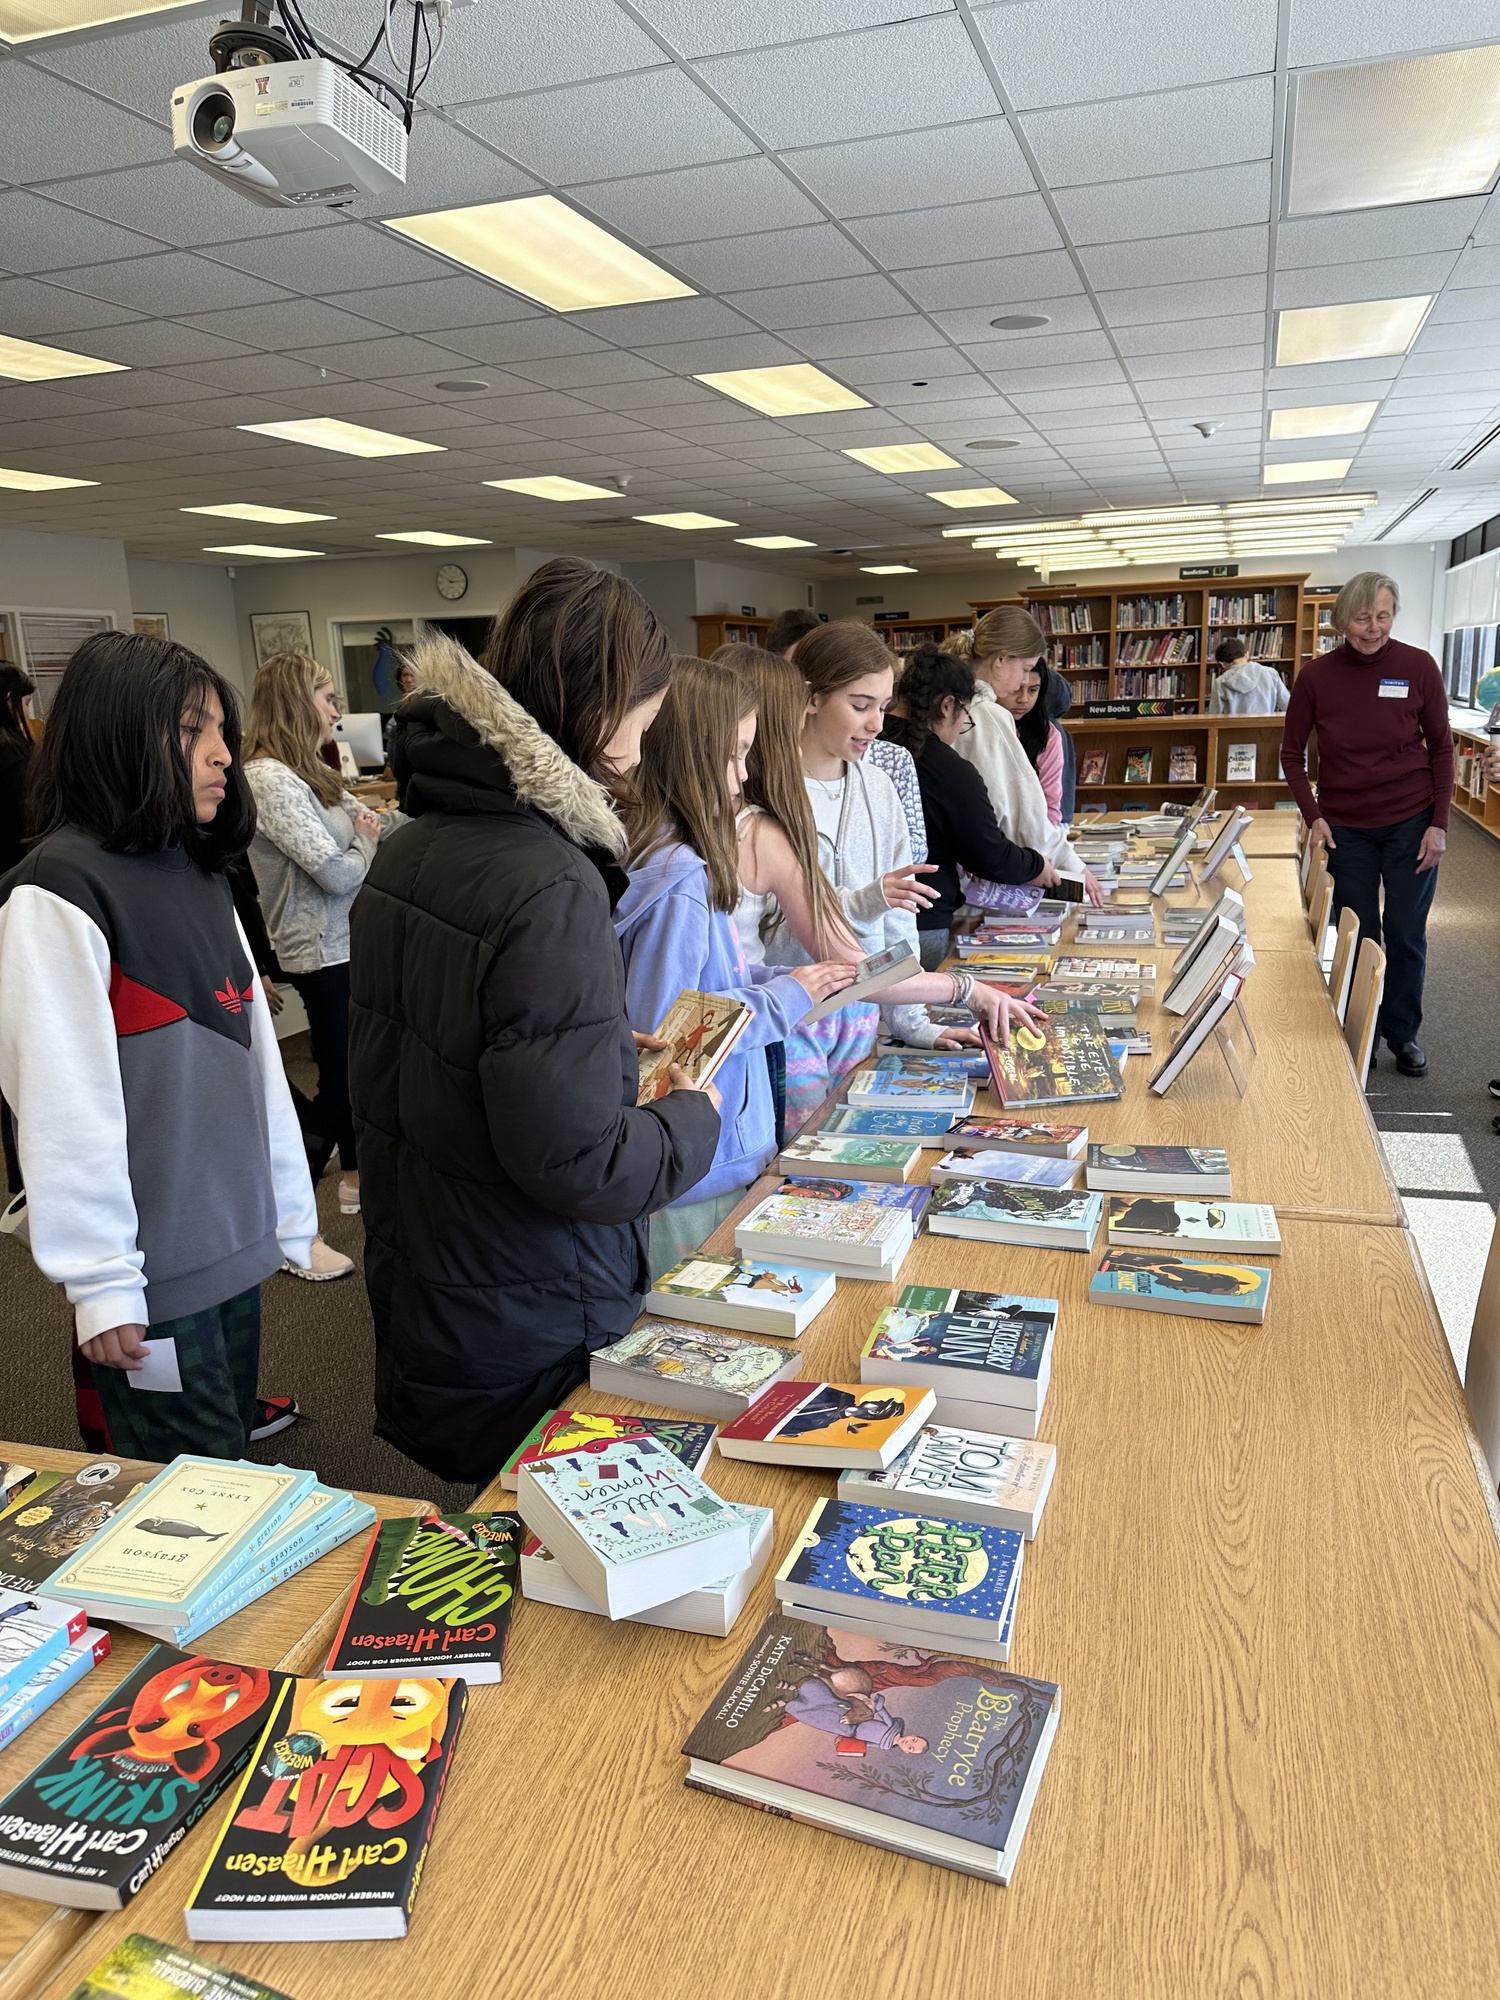 Pierson Middle School students spent the day reading and discussing books
on diversity and inclusion during their Great Read-In Day. COURTESY SAG HARBOR SCHOOL DISTRICT